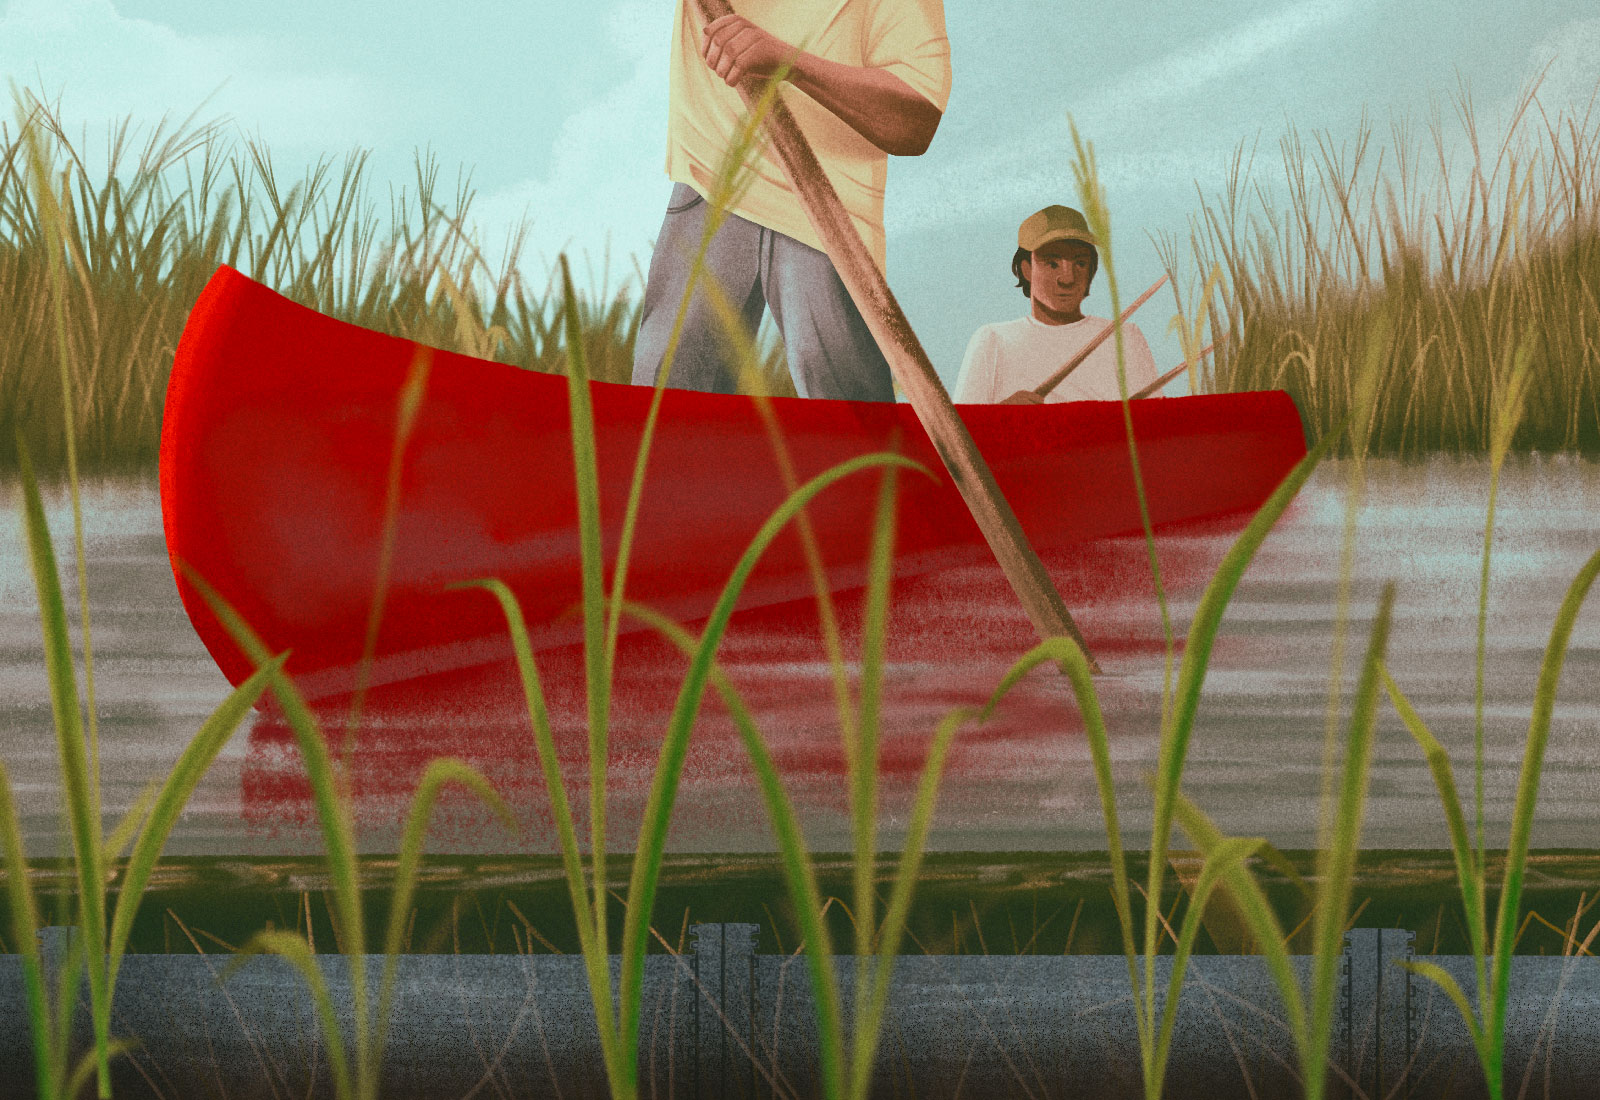 Illustration: Two First Nations men in a red canoe harvesting wild rice, with a pipeline under the water